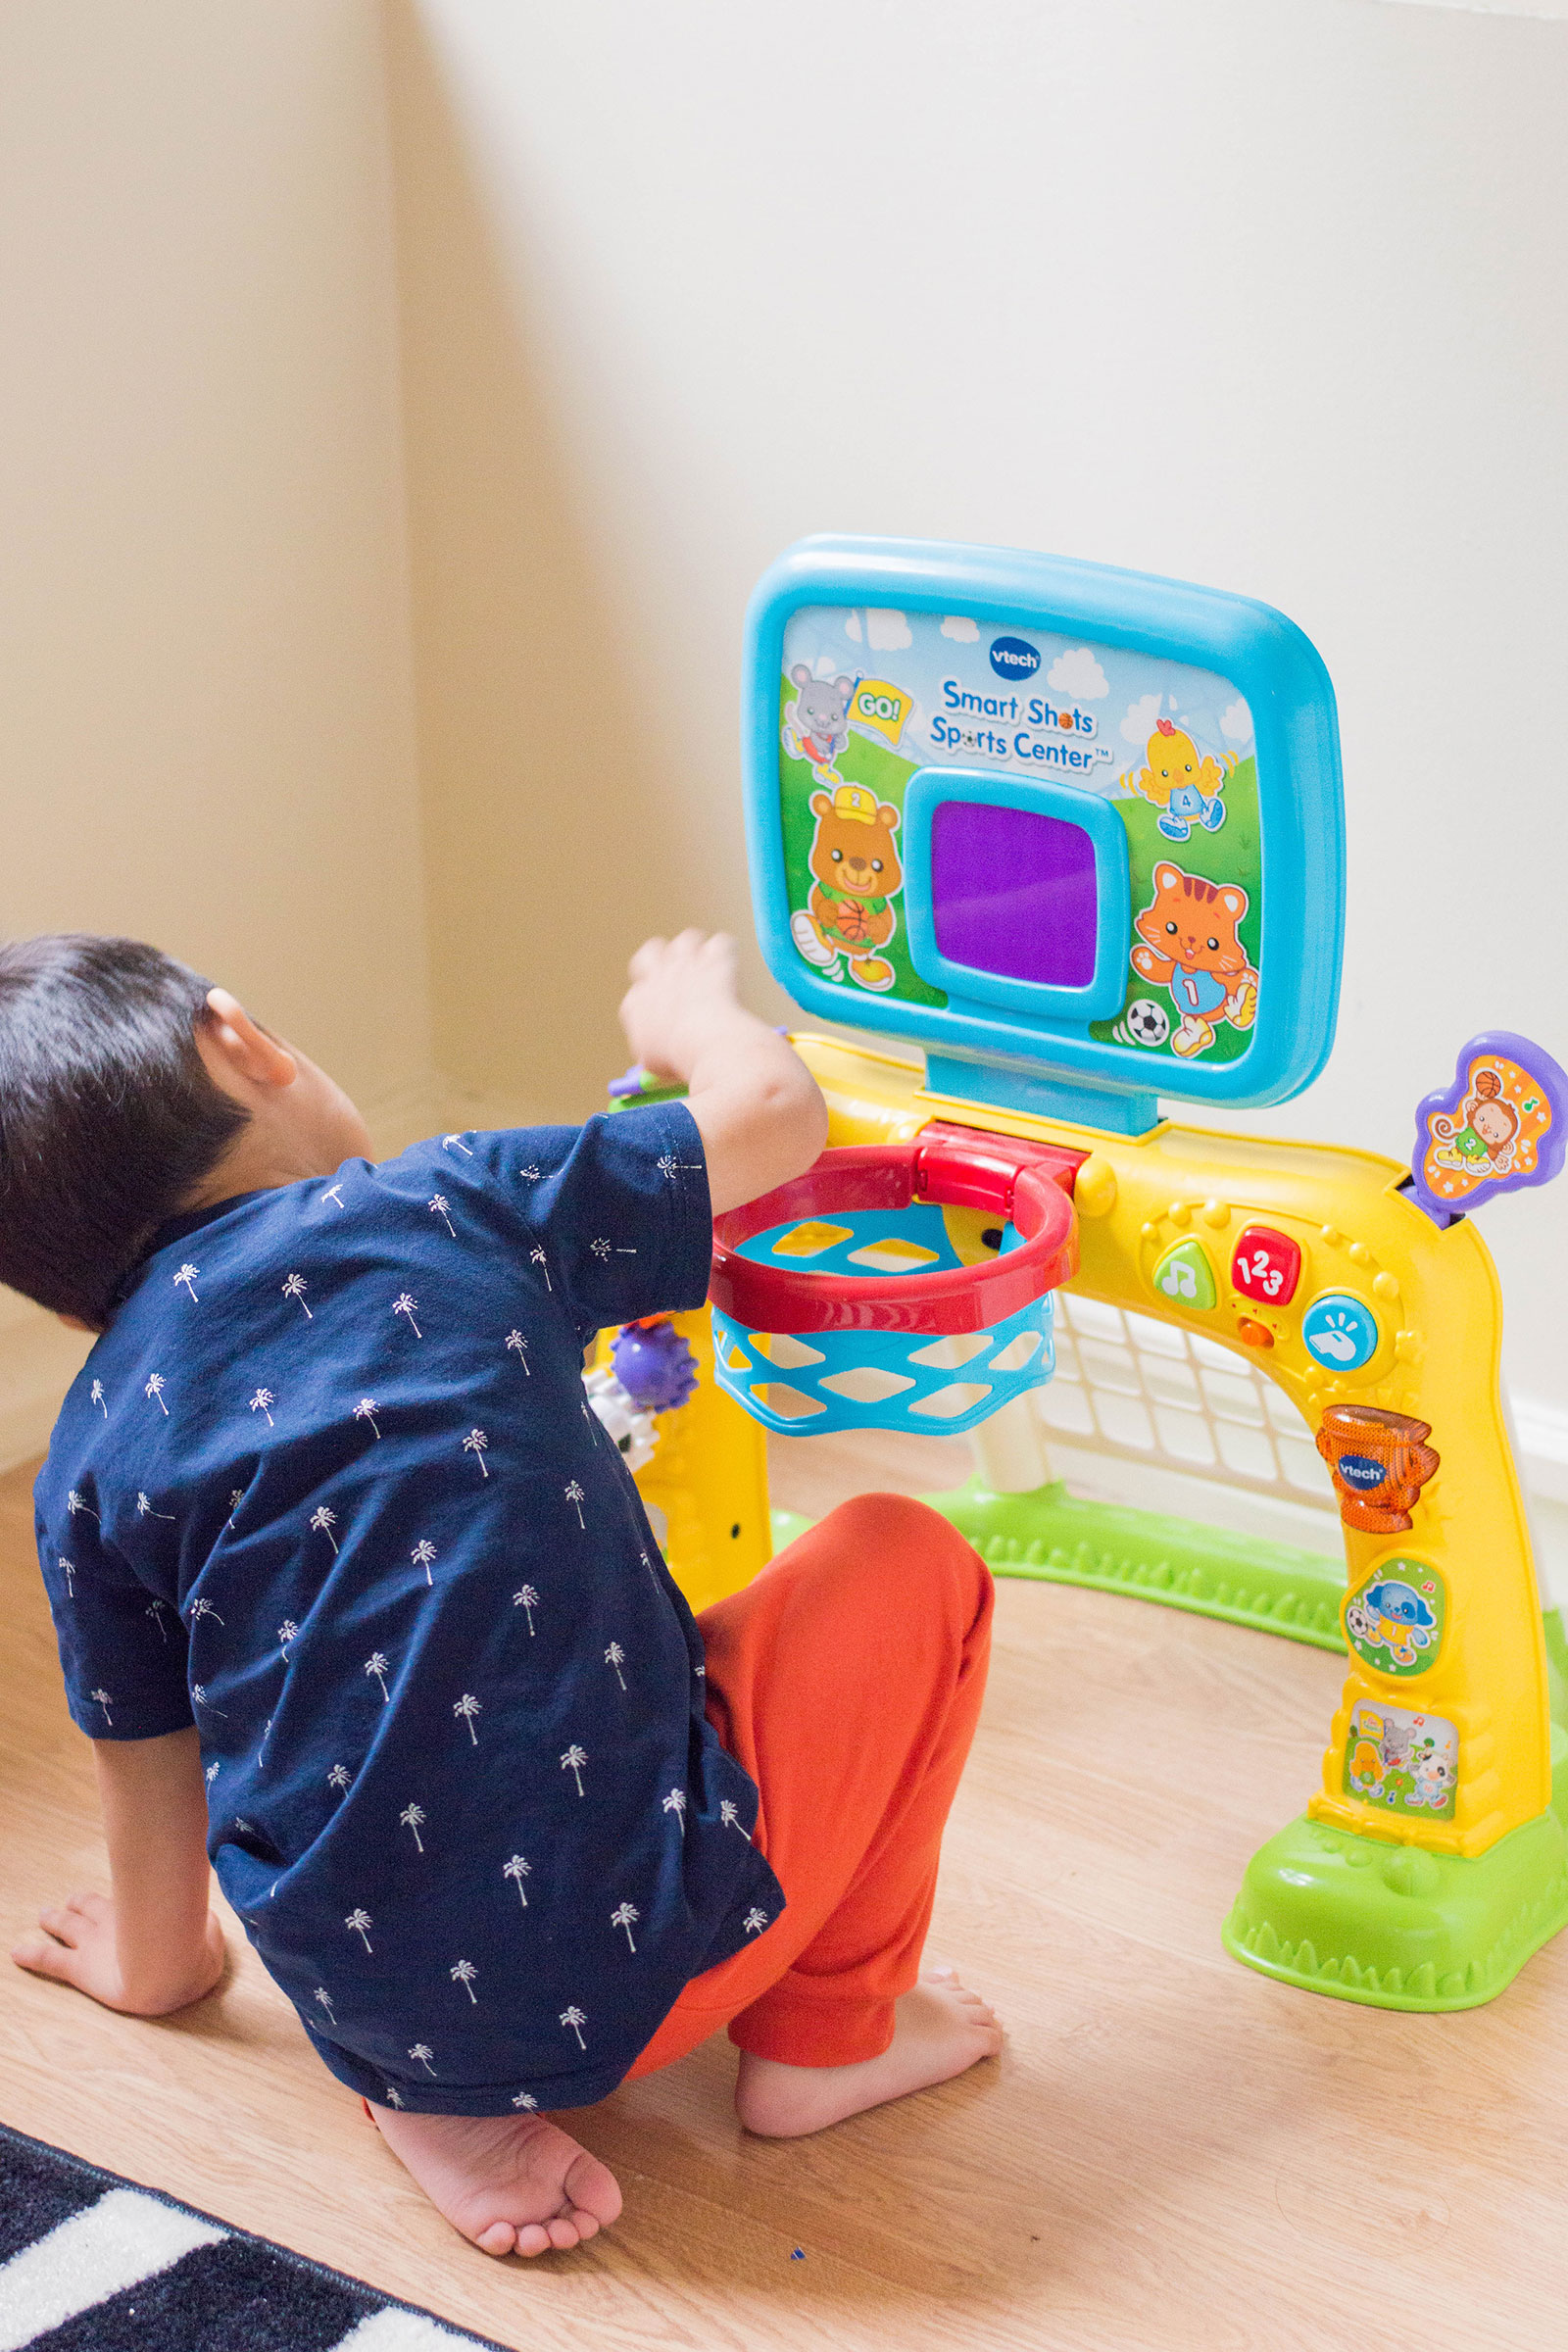 Our Top Picks for the Best Toddler Toys